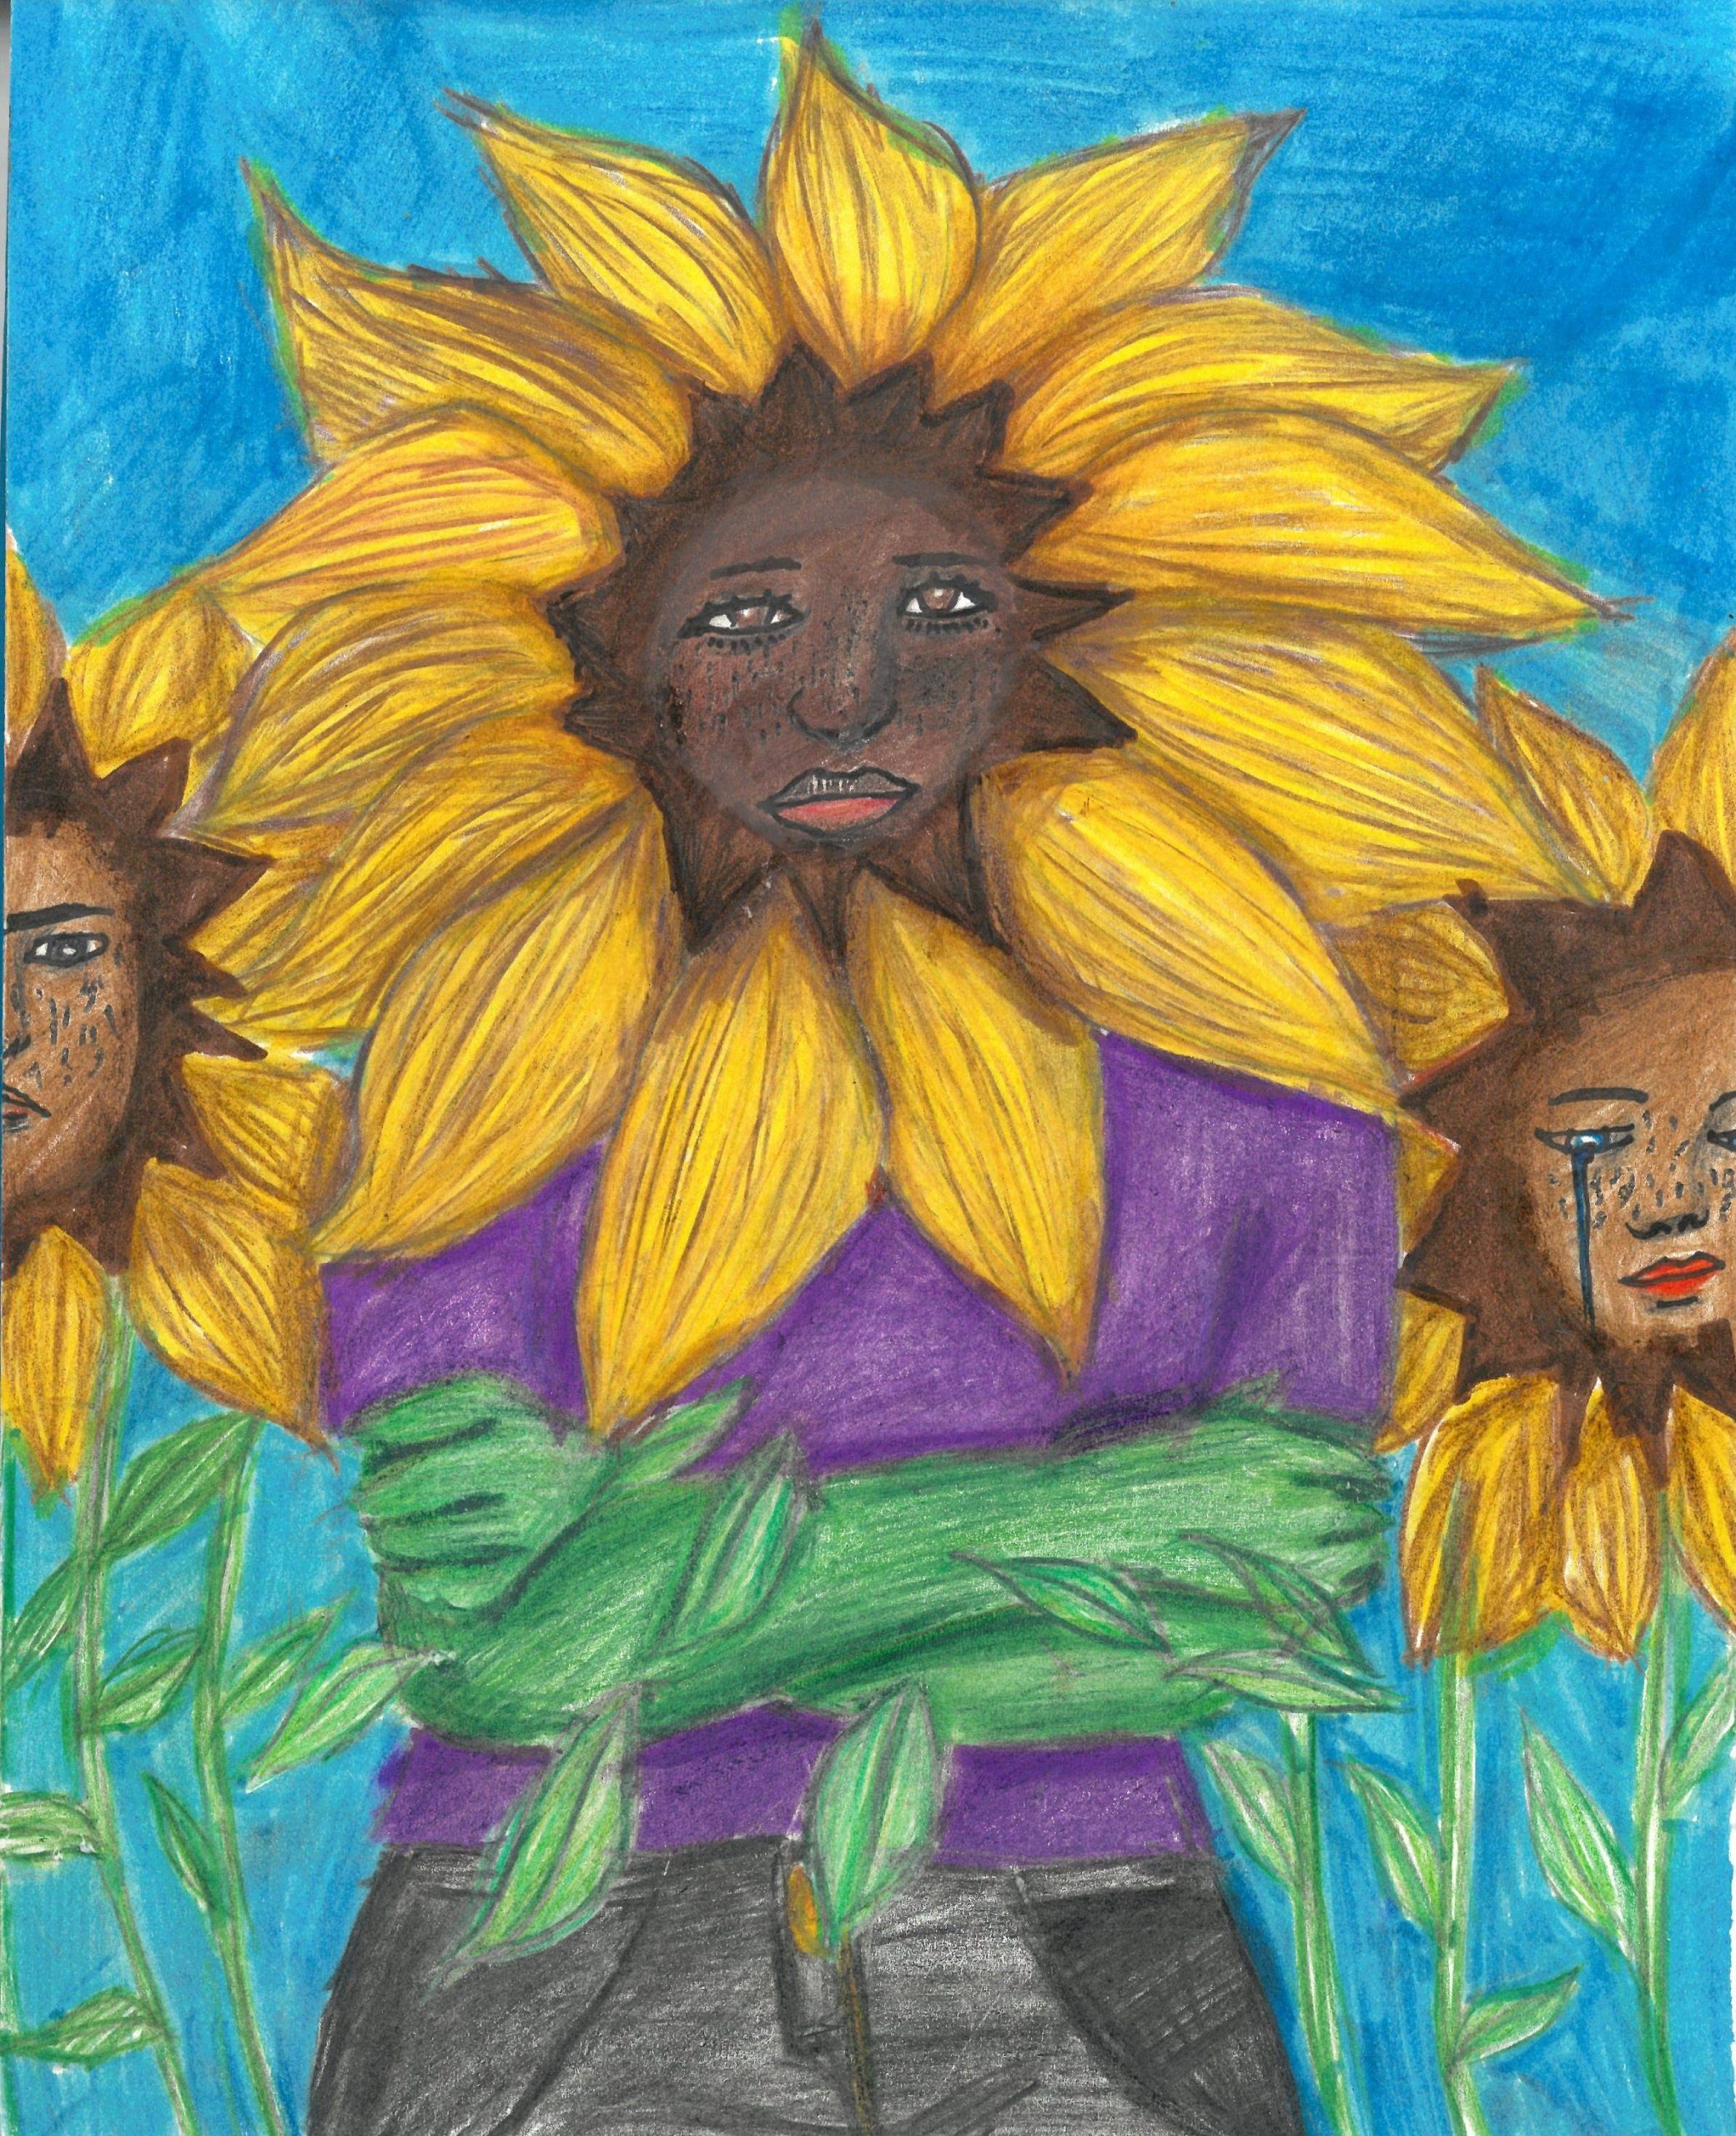 Student Surrealist Art Exhibit, The Field of Sunflowers 
By Zenell Grandsion 
